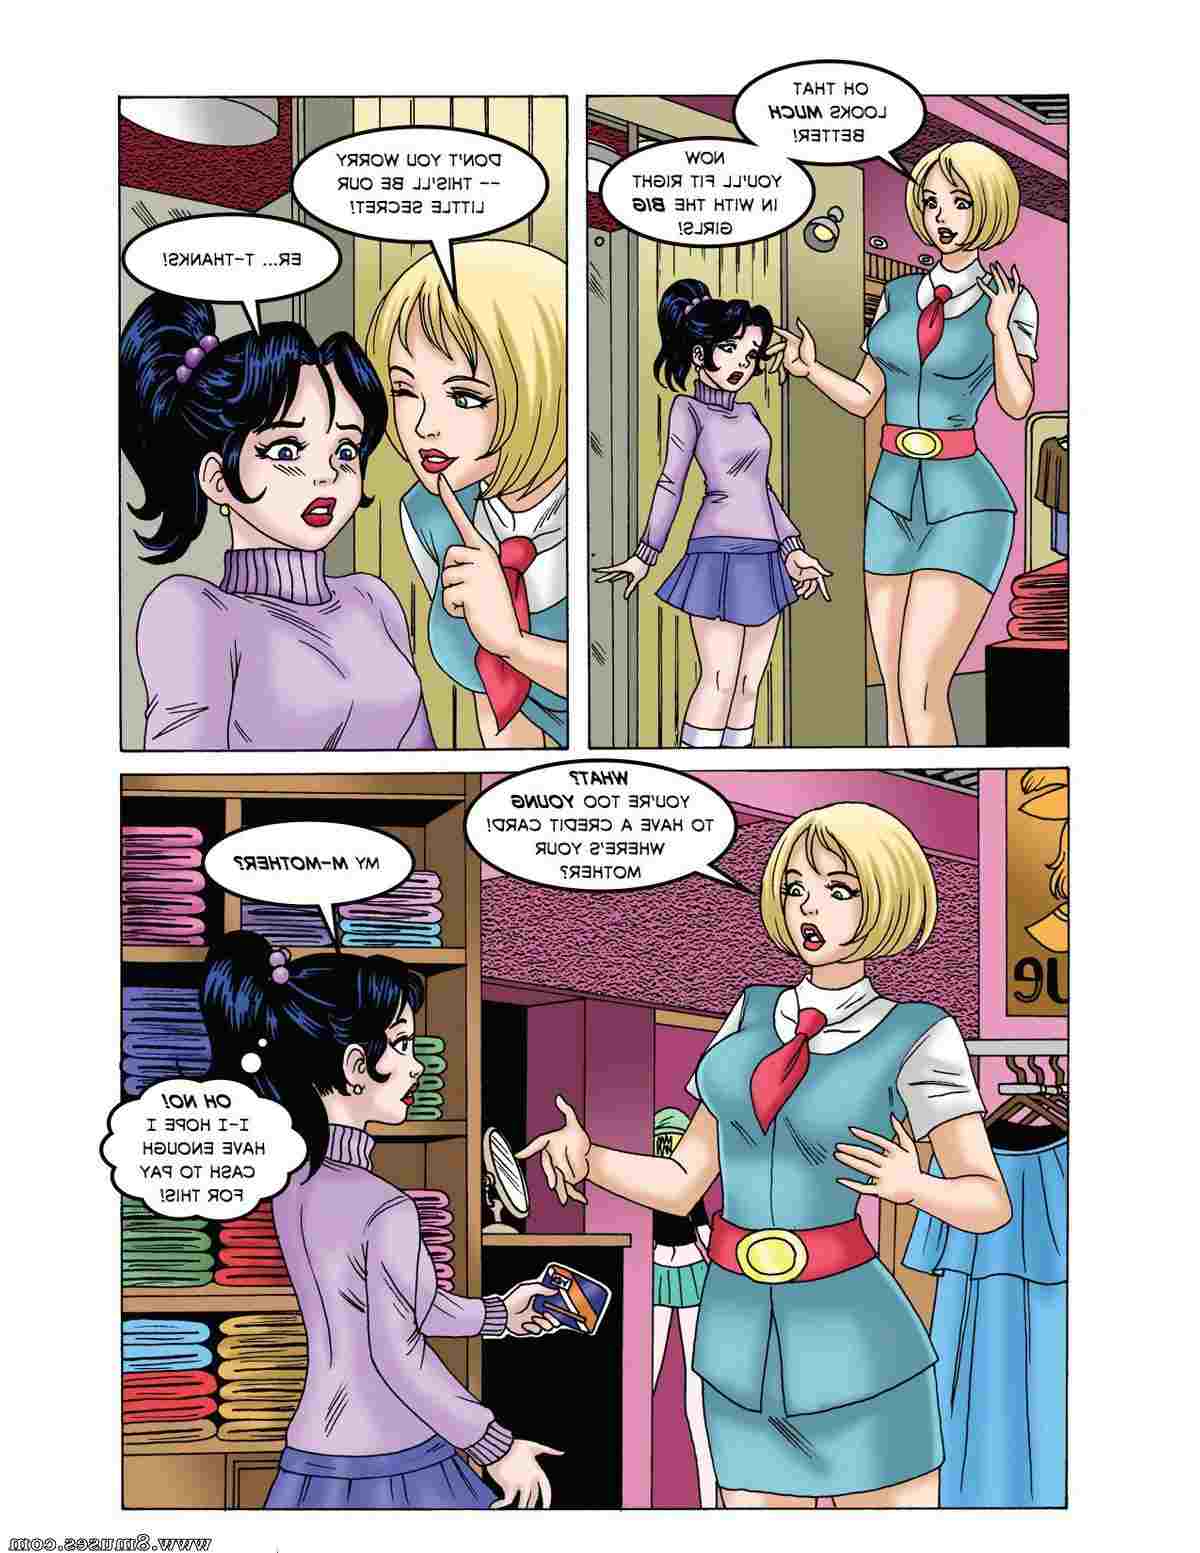 DreamTales-Comics/Crybaby-Marilyn Crybaby_Marilyn__8muses_-_Sex_and_Porn_Comics_13.jpg